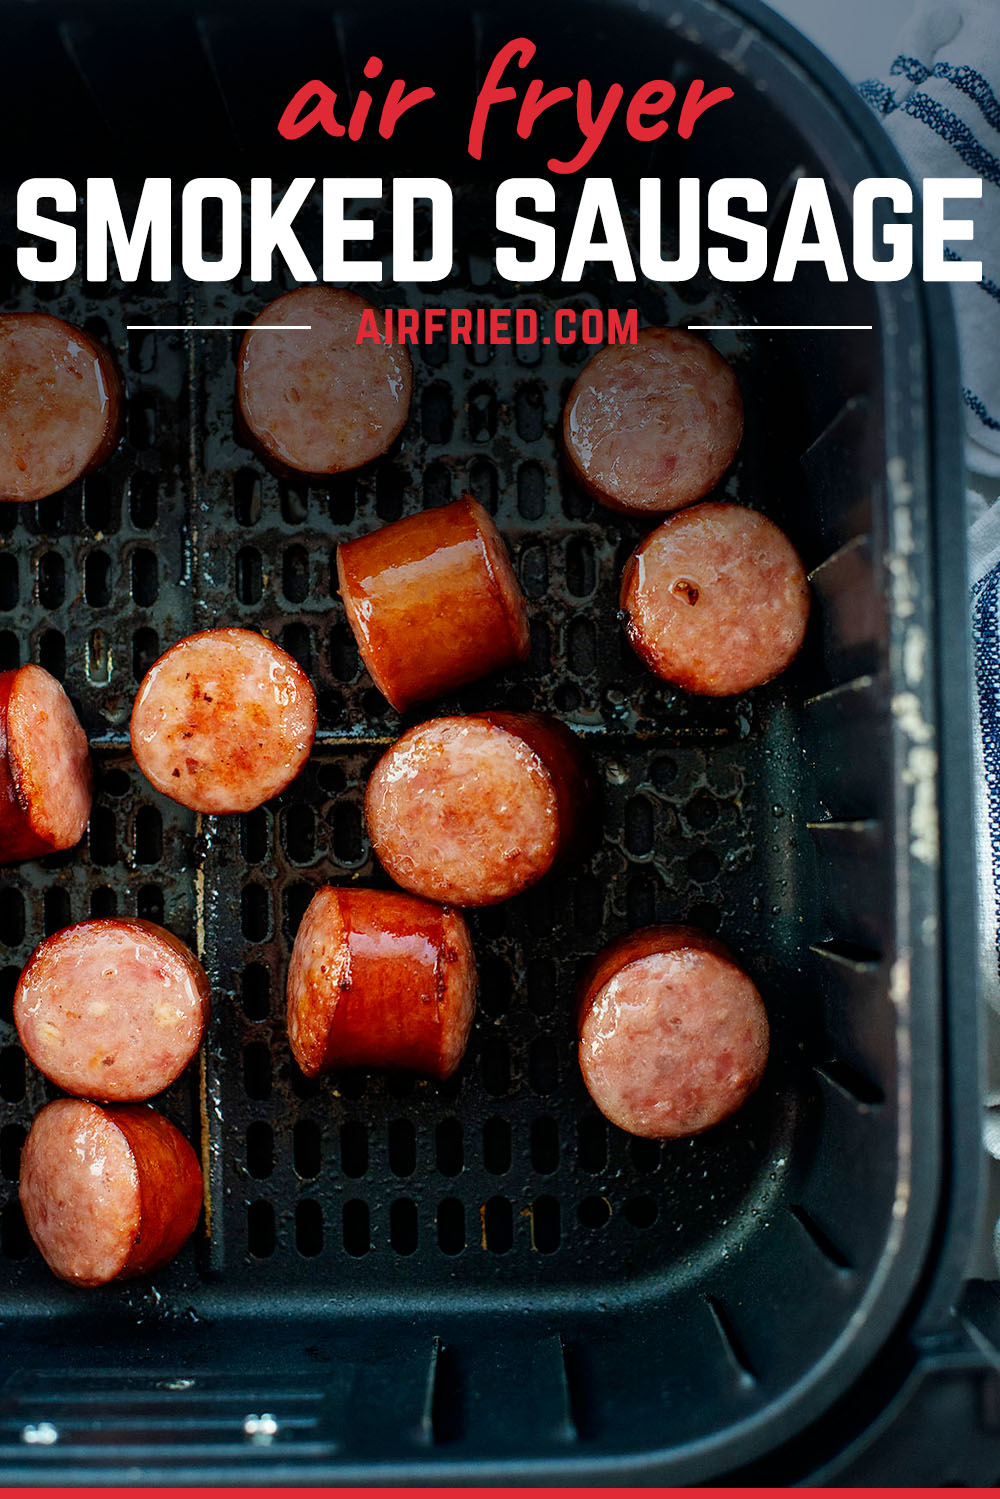 Air fryer smoked sausages are a tasty appetizer that can be dipped in BBQ sauce or mustard!